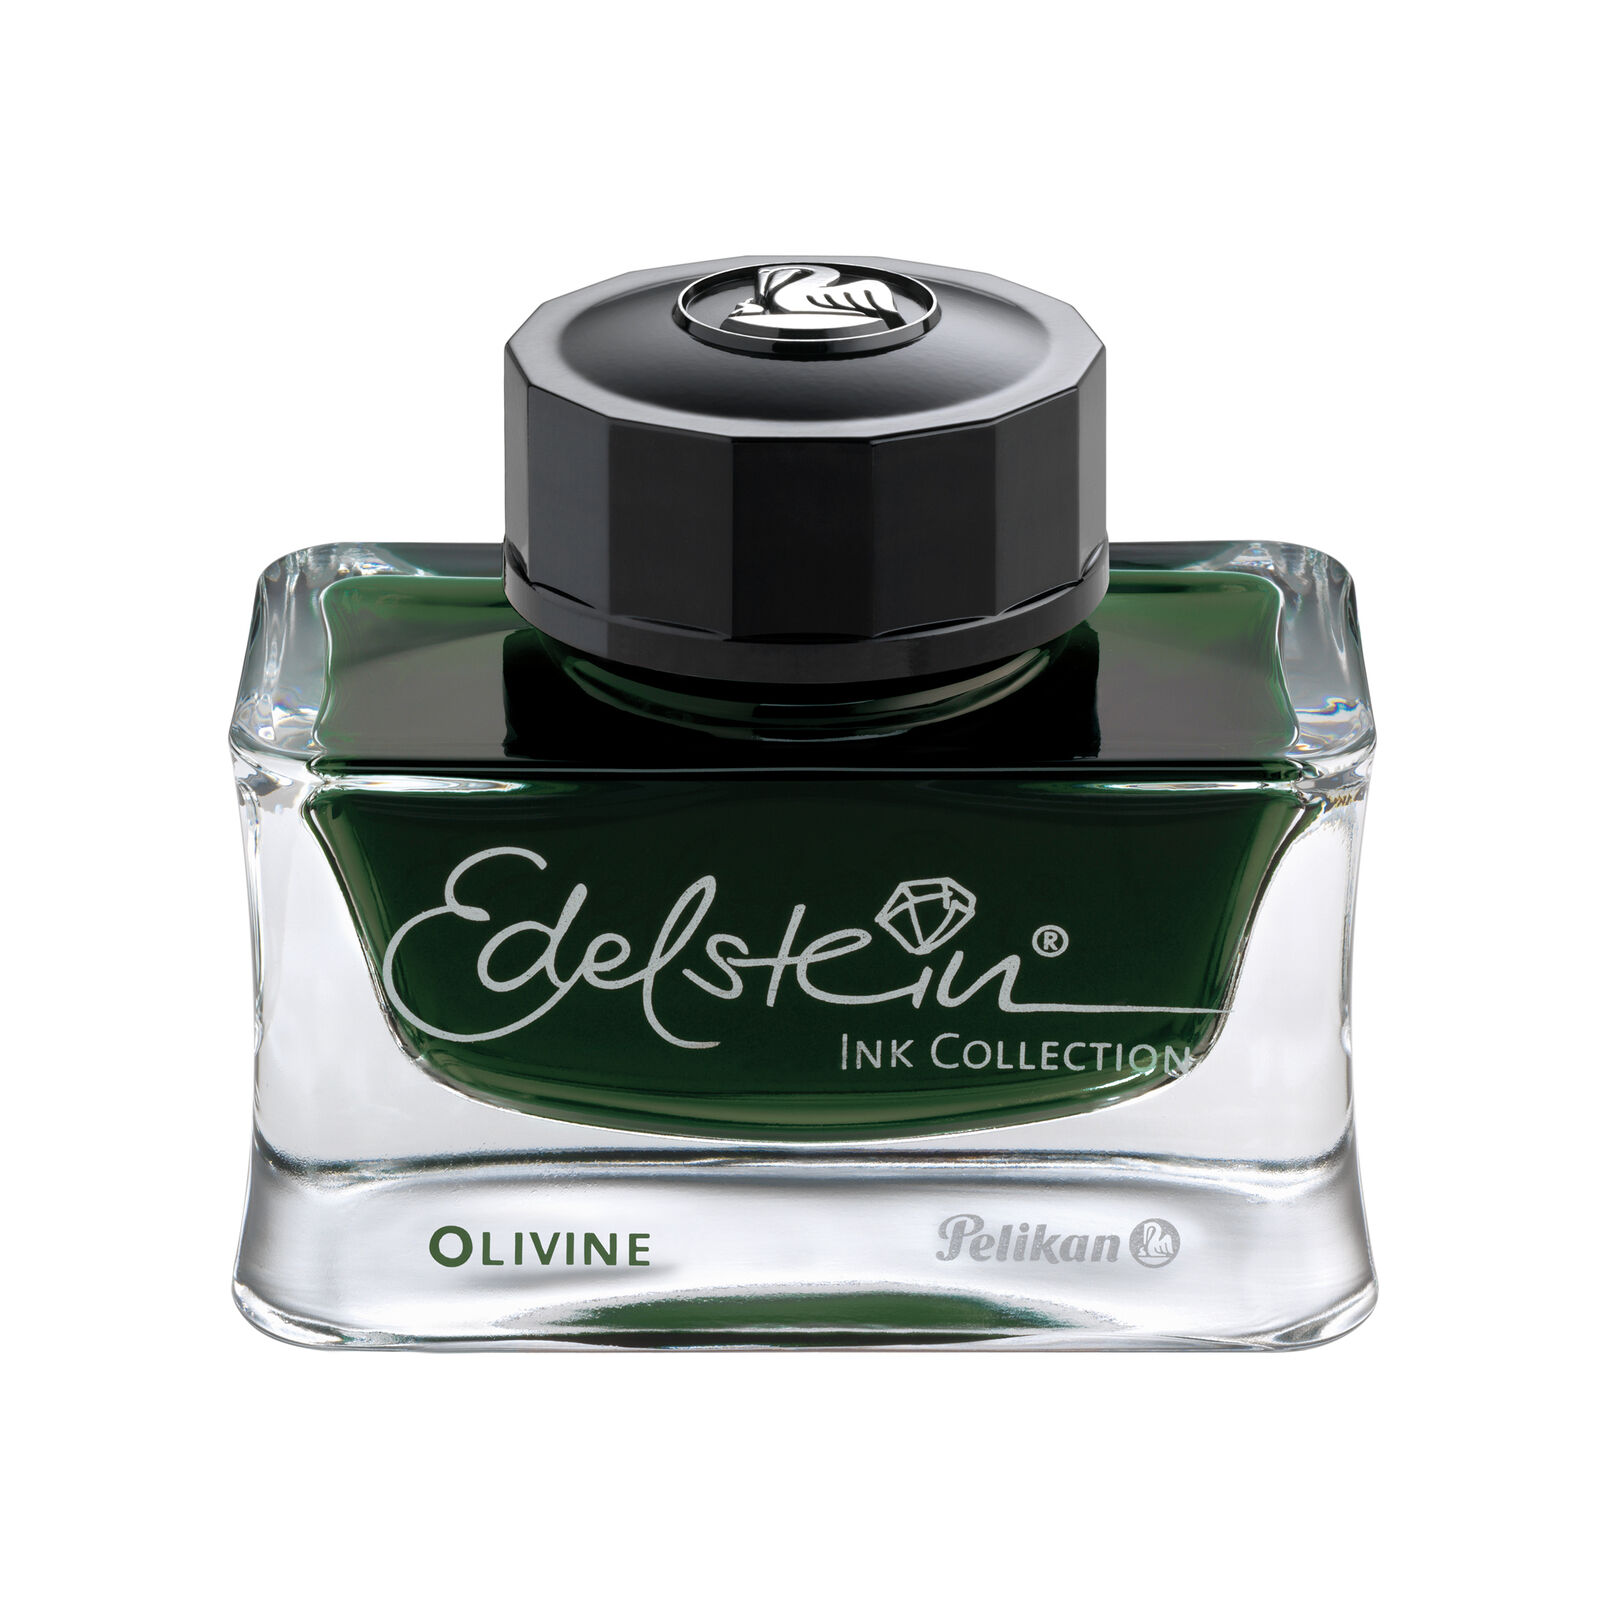 Pelikan Edelstein 2018 Ink of the Year - Olivine - Olive Green - 300674 - New